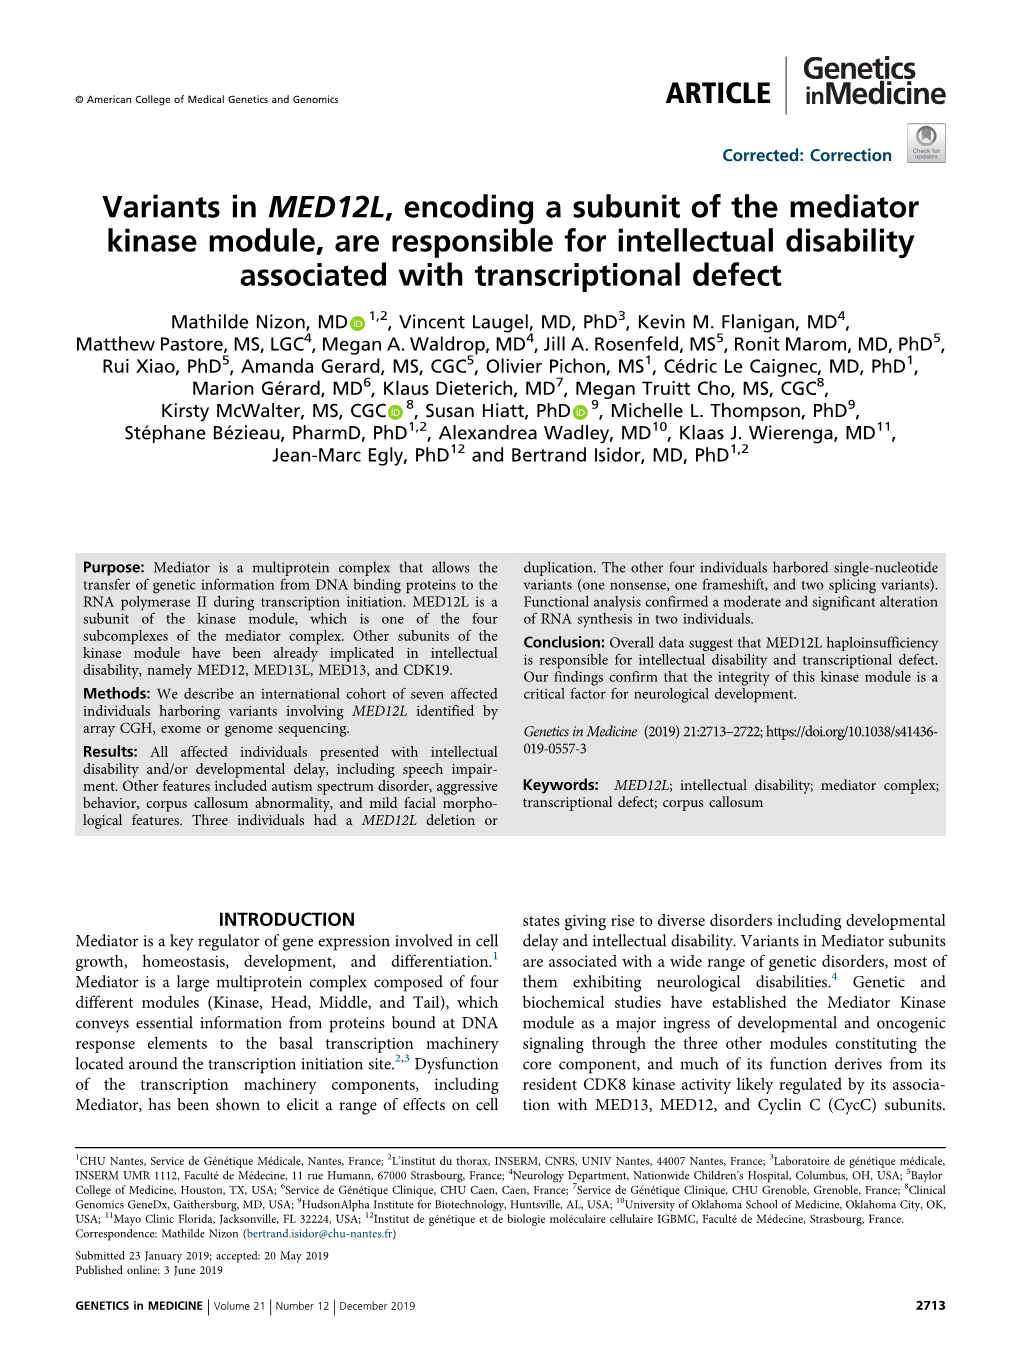 Variants in MED12L, Encoding a Subunit of the Mediator Kinase Module, Are Responsible for Intellectual Disability Associated with Transcriptional Defect